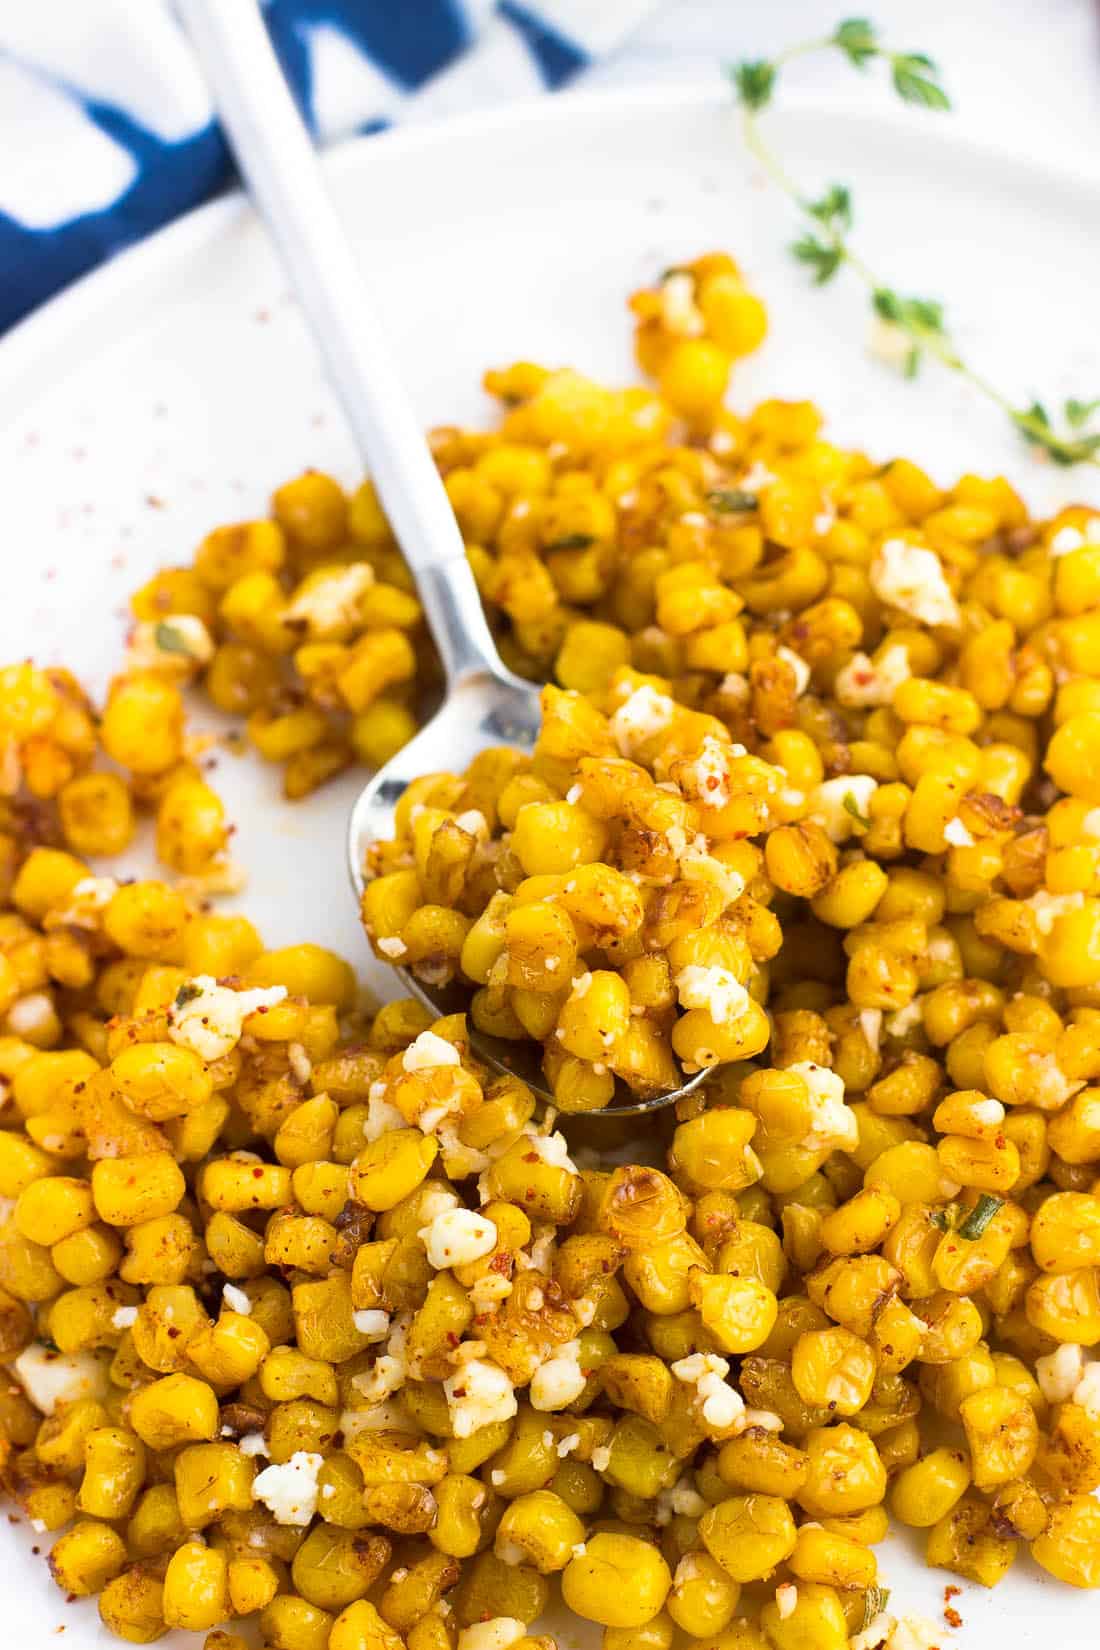 A spoon of roasted corn on a plate